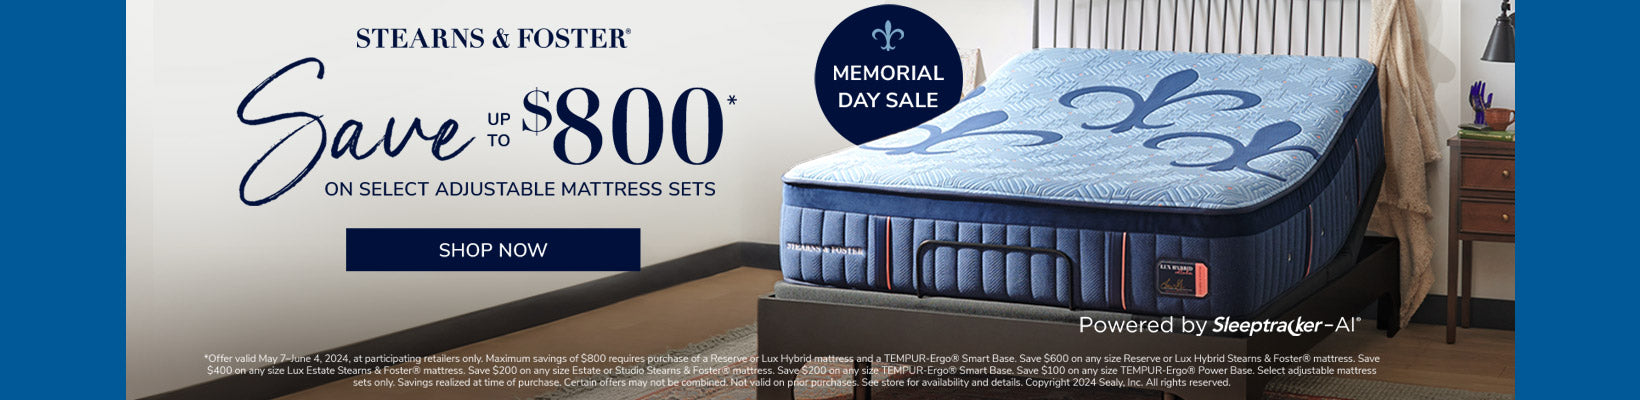 Stearns & Foster Memorial Day Sale